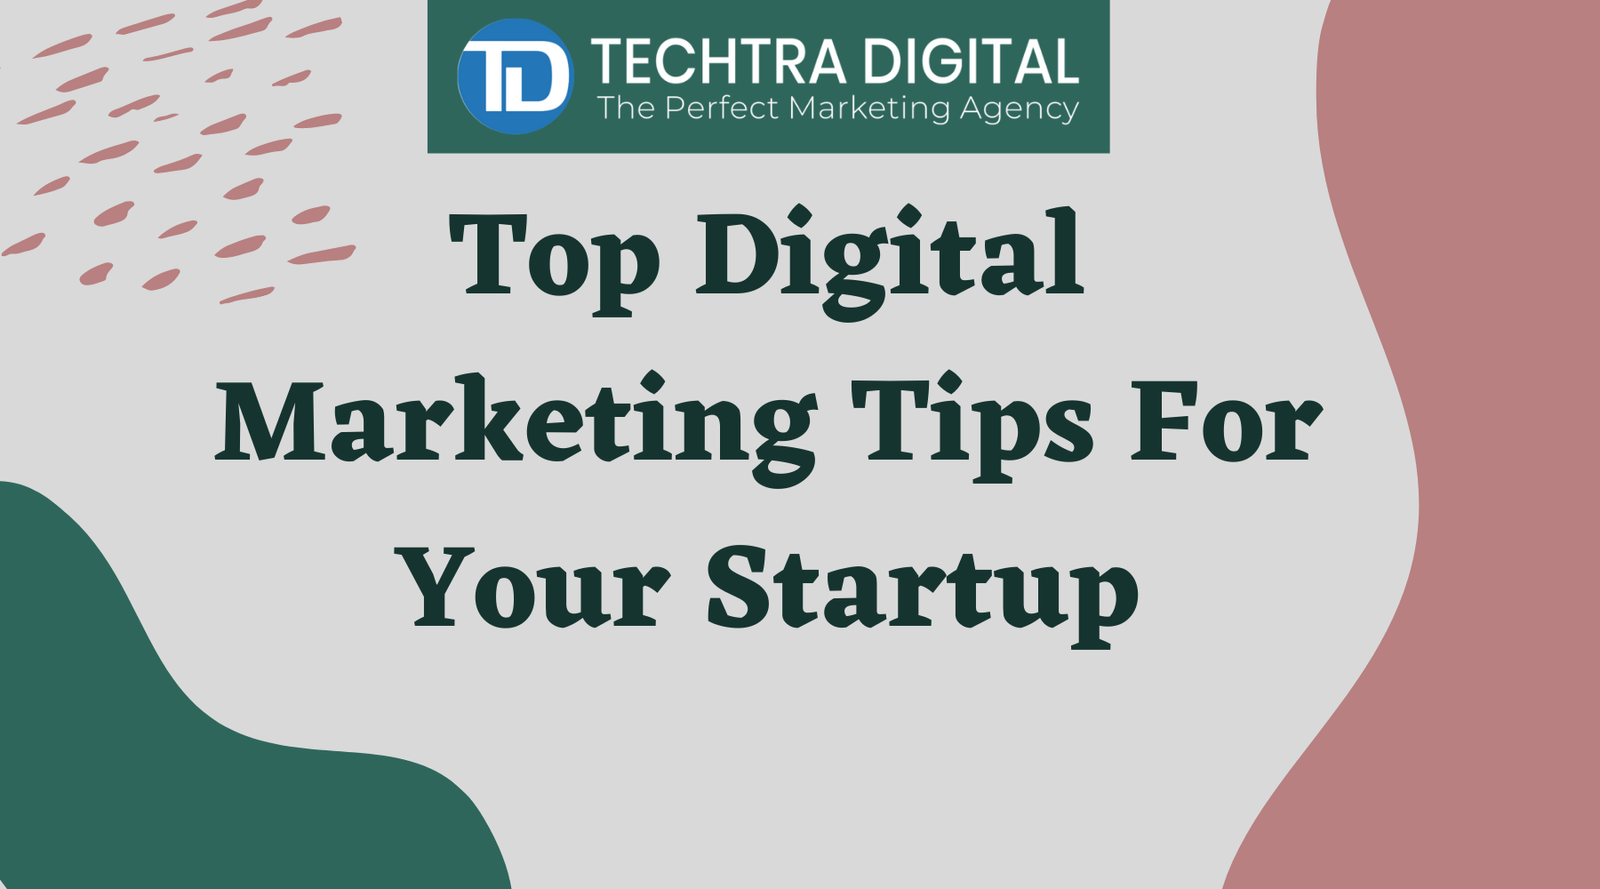 Top 5 Digital Marketing Tips For Your Startup